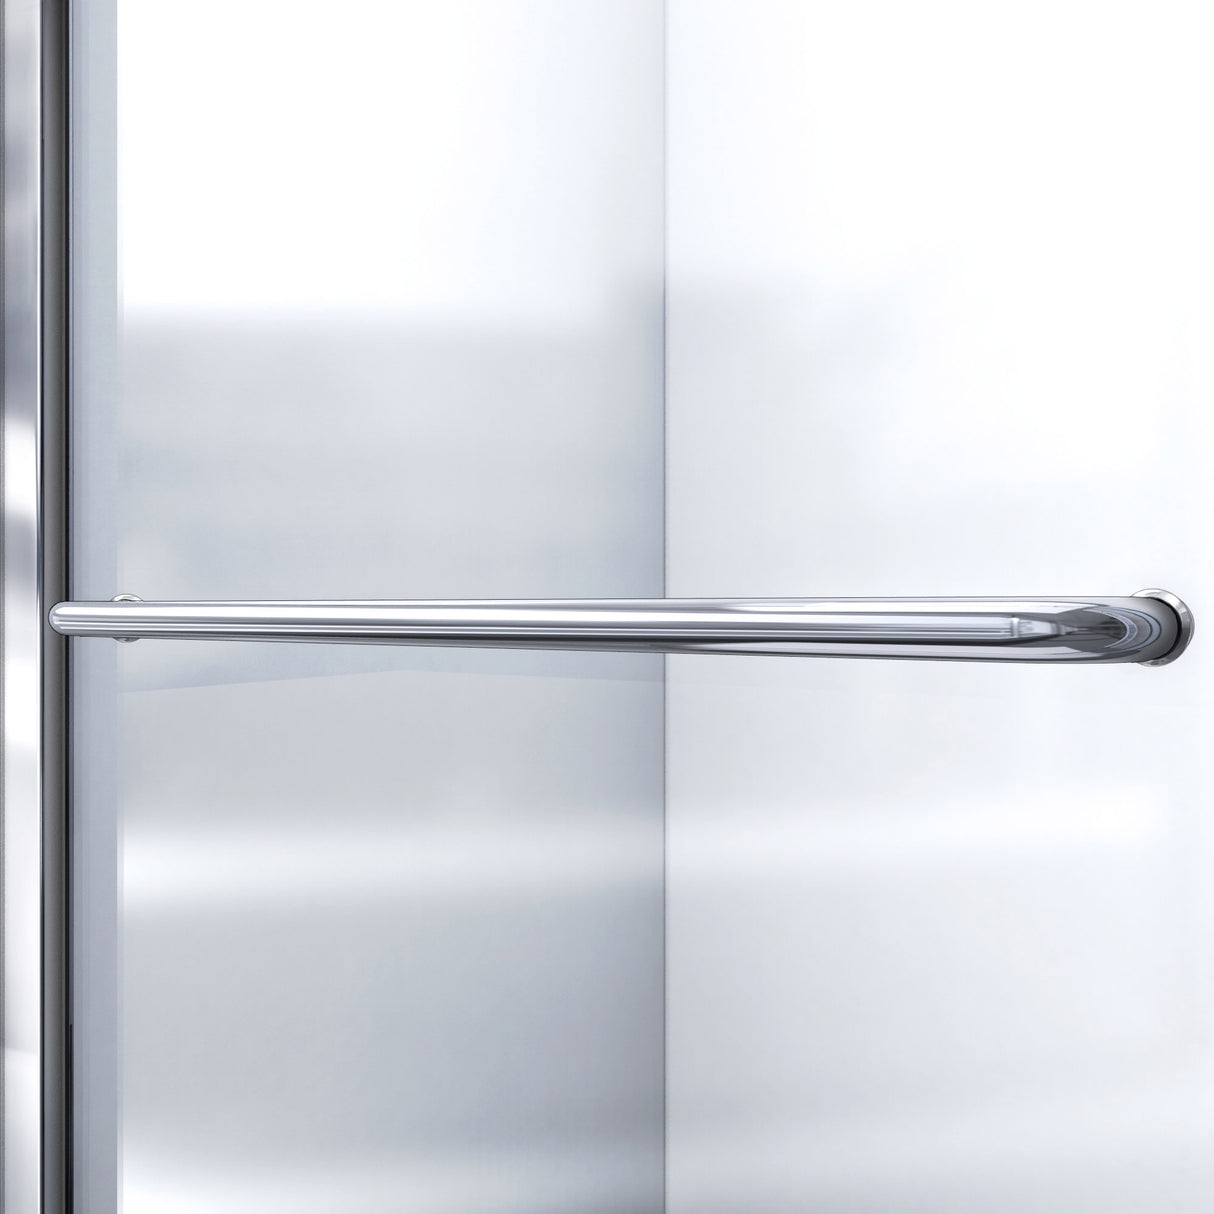 DreamLine Infinity-Z 32 in. D x 60 in. W x 74 3/4 in. H Clear Sliding Shower Door in Oil Rubbed Bronze and Left Drain White Base